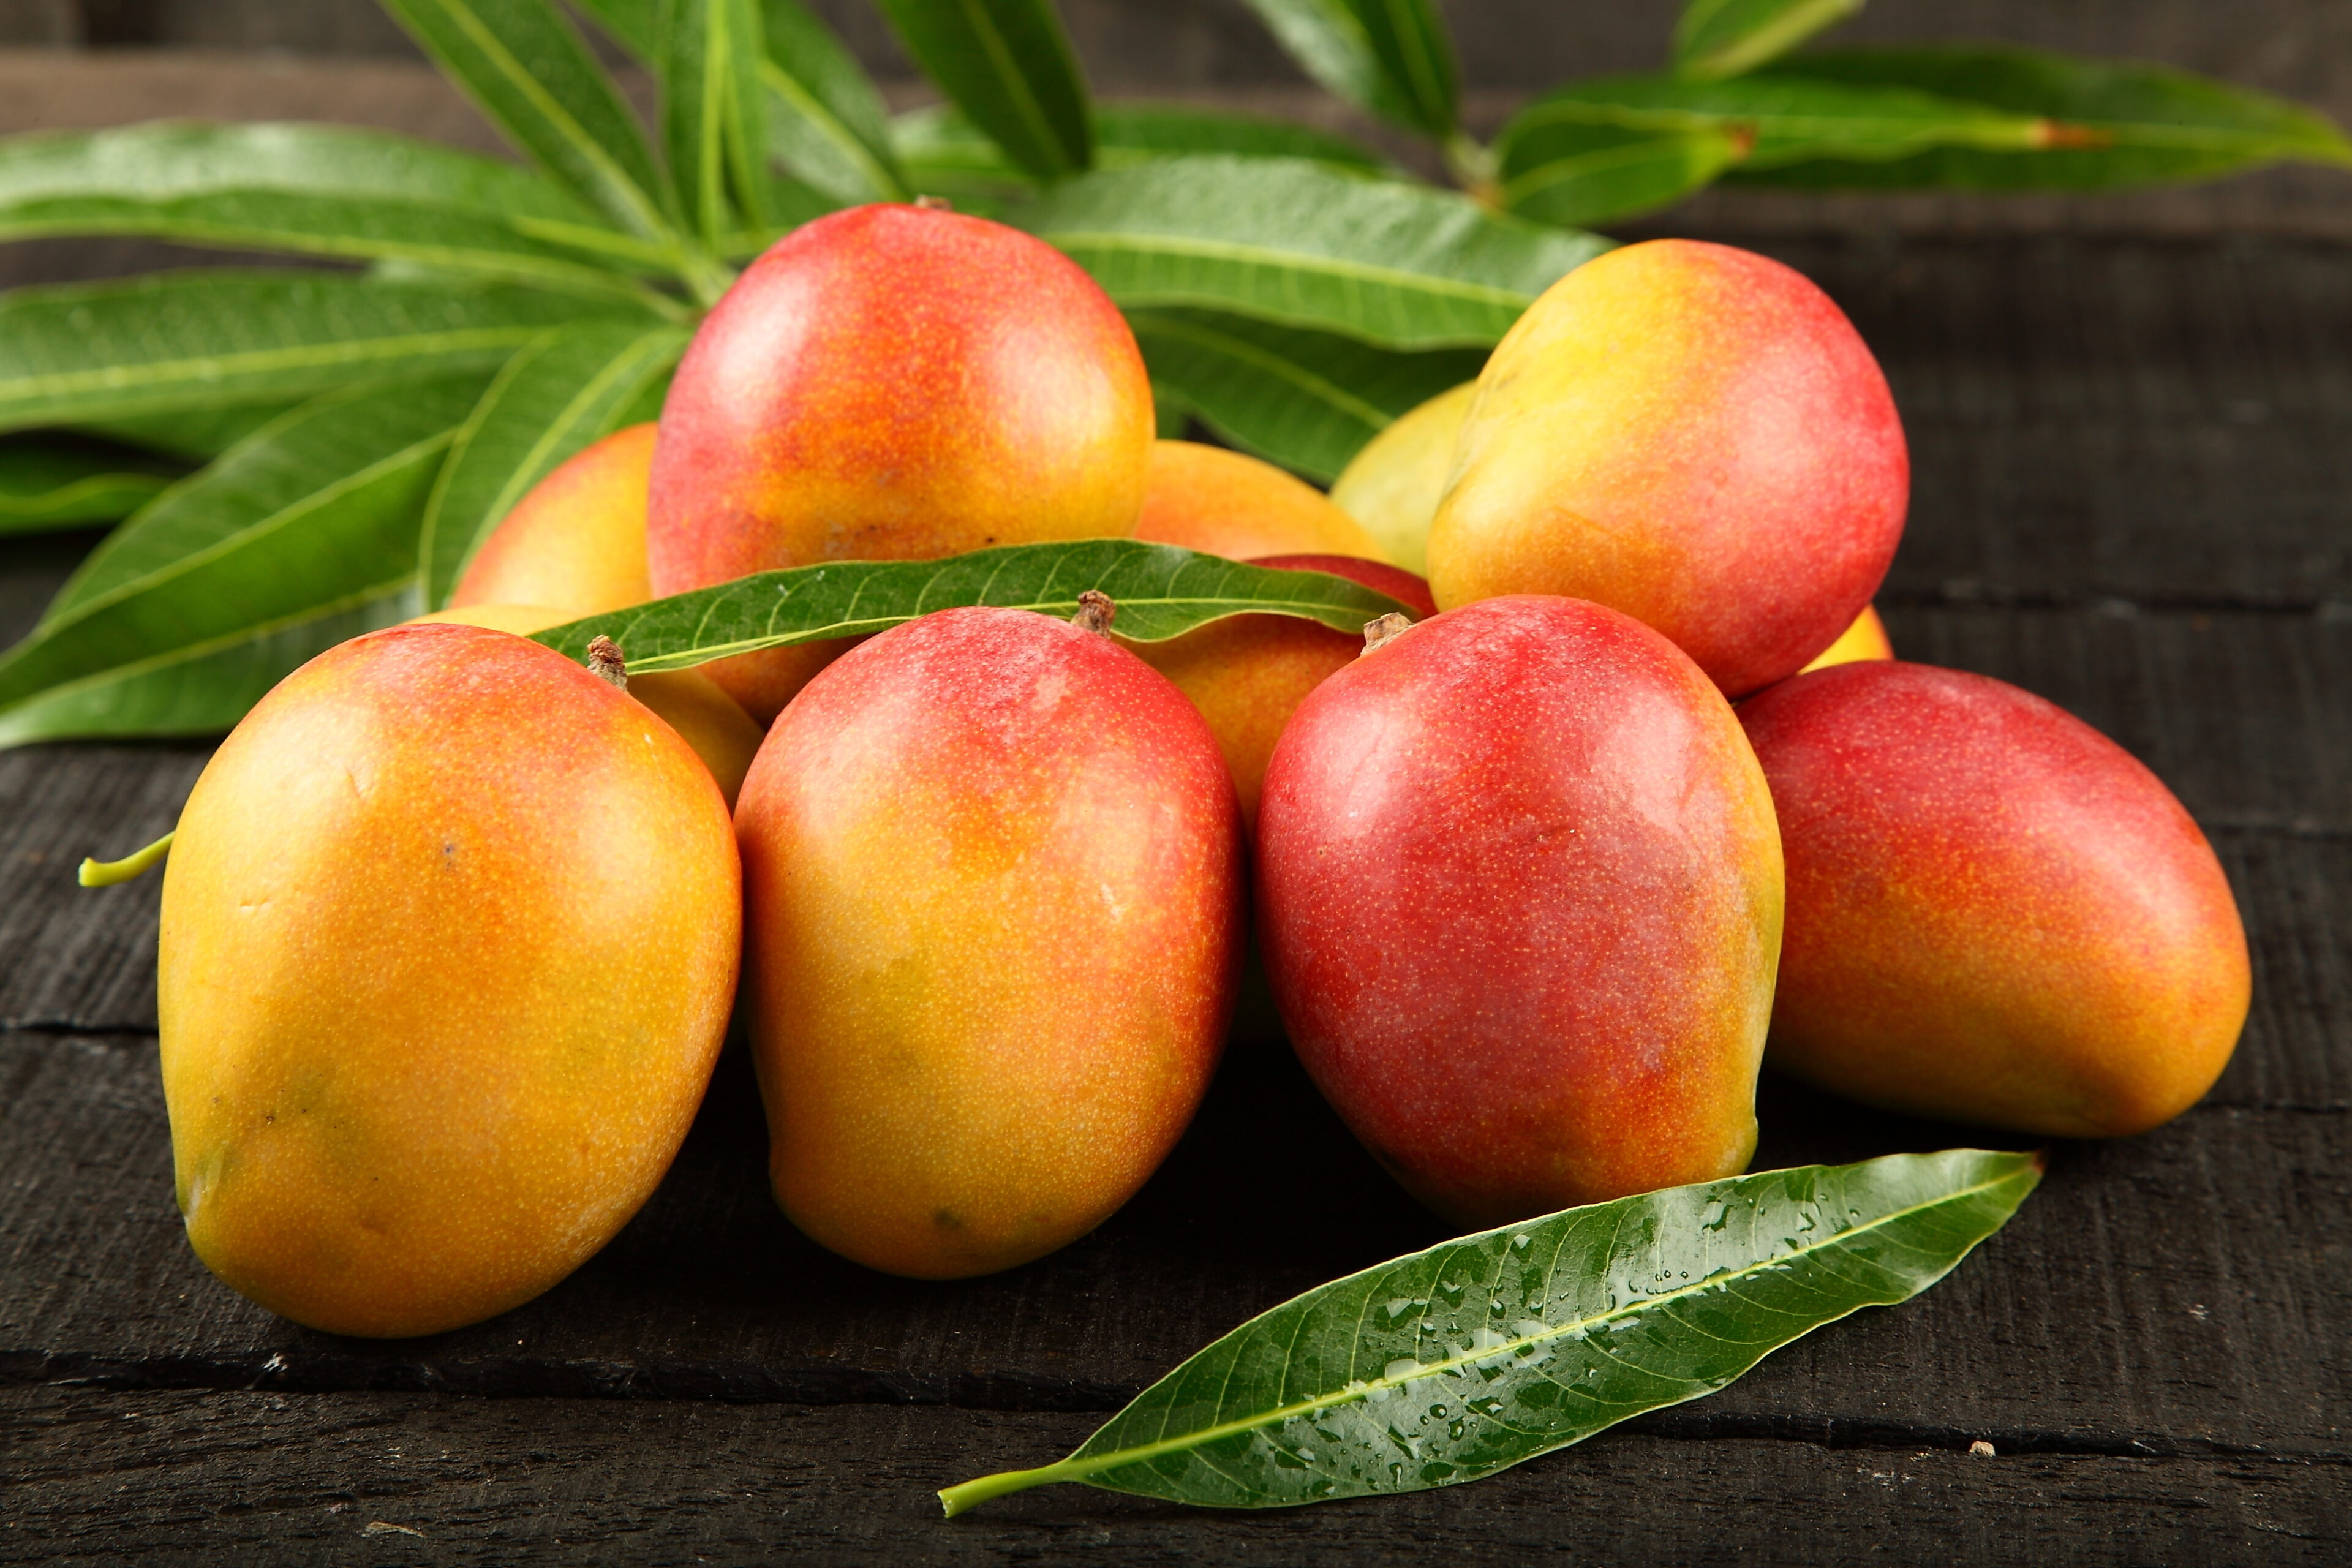 Mangoes: Vitamin C for collagen production